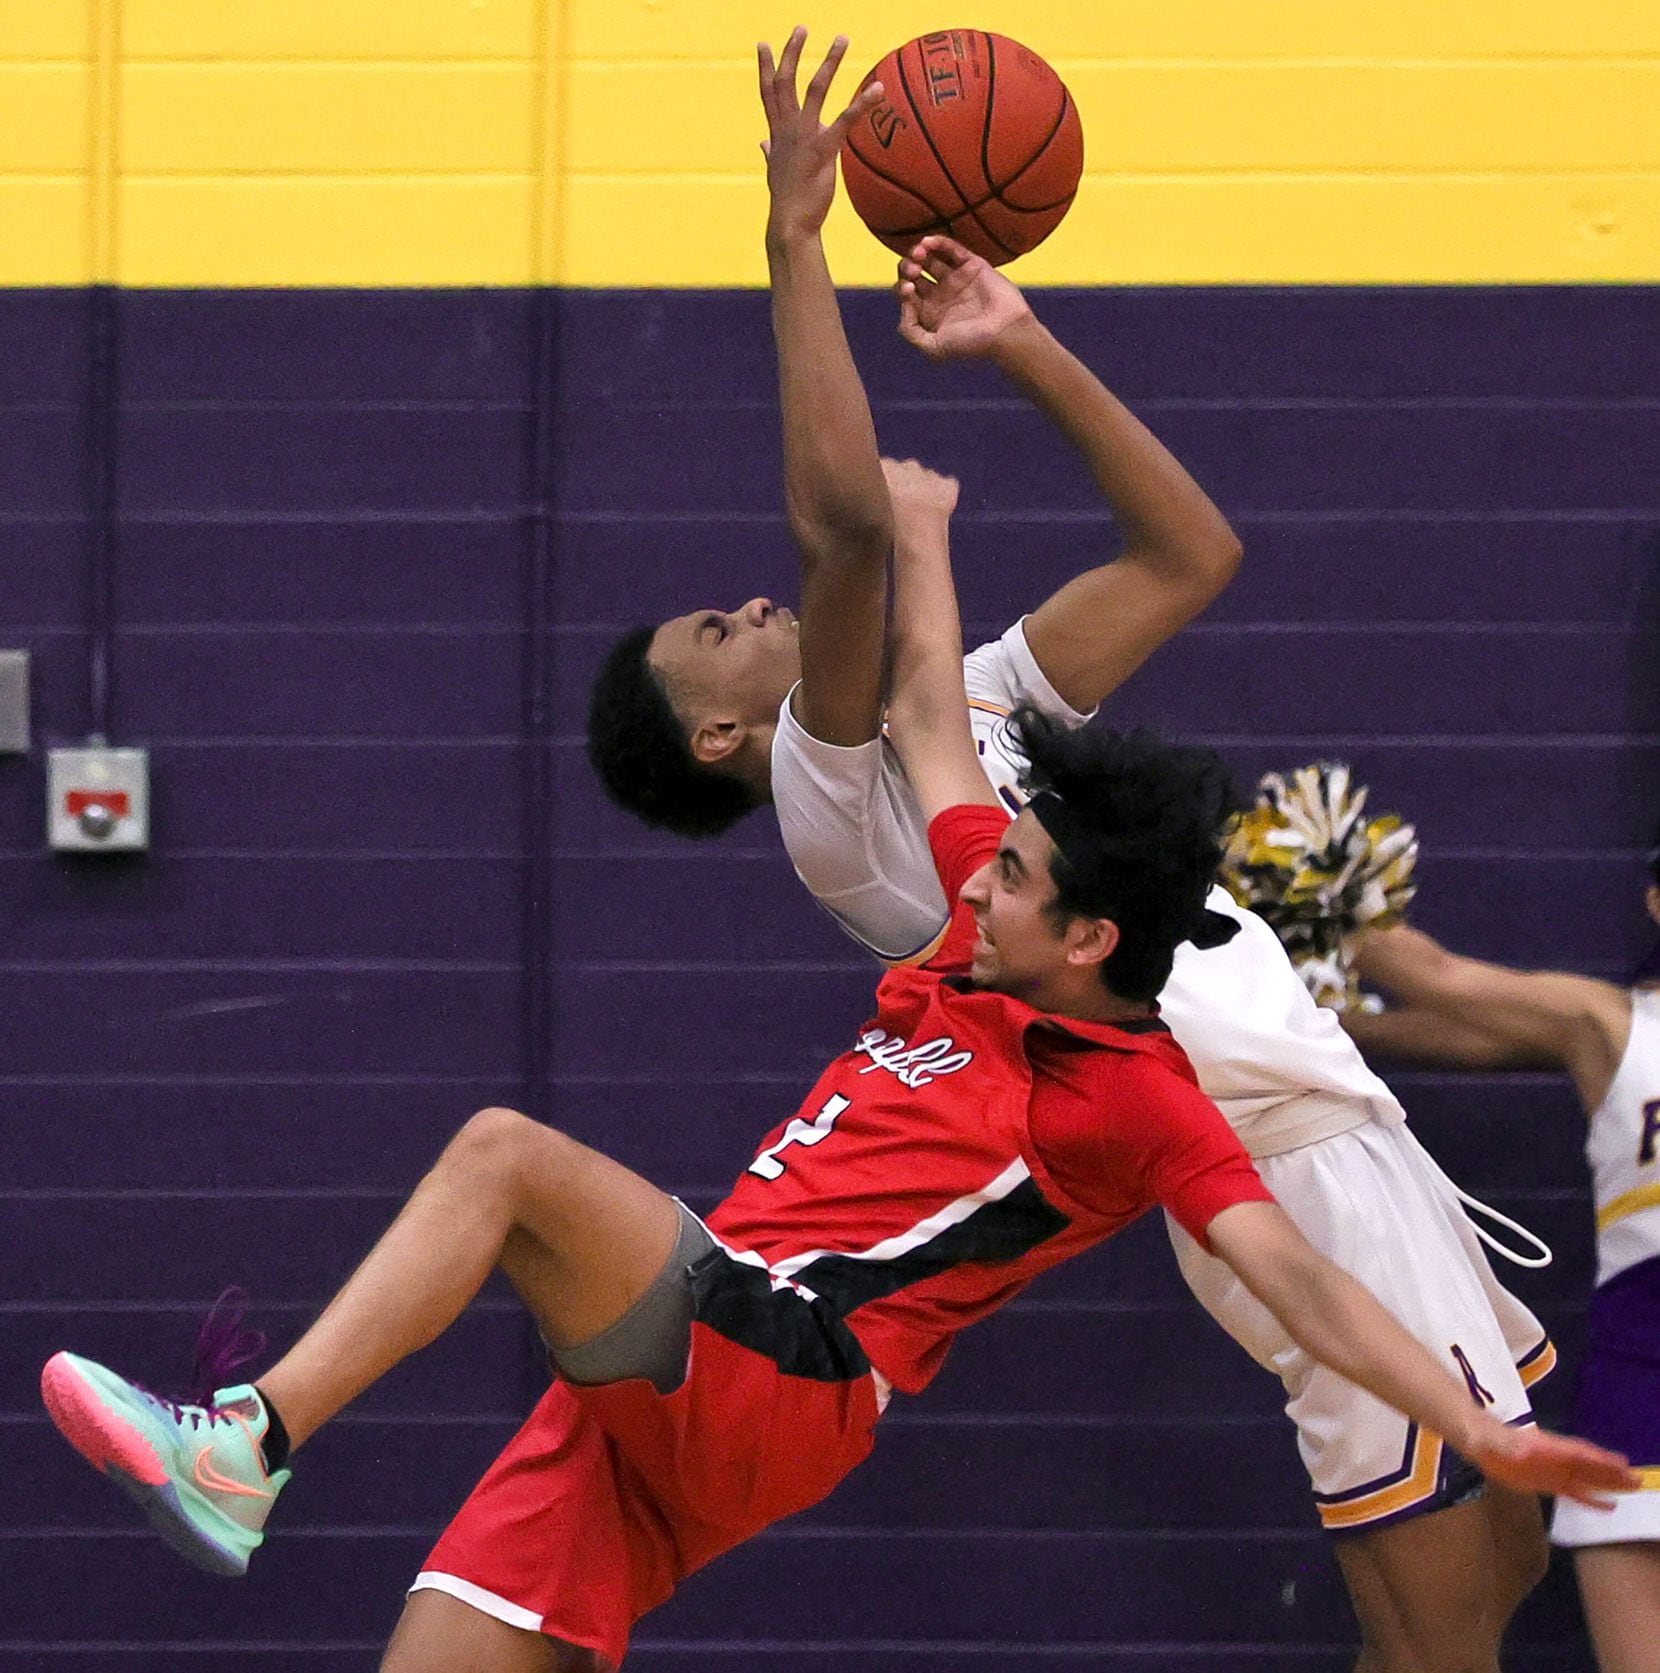 Richardson guard Rylan Griffen collides with Coppell guard Devank Rane (2) during the second half of a 6A nondistrict boys high school basketball game played on December 7, 2021 at Richardson High School in Richardson.  (Steve Nurenberg/Special Contributor)